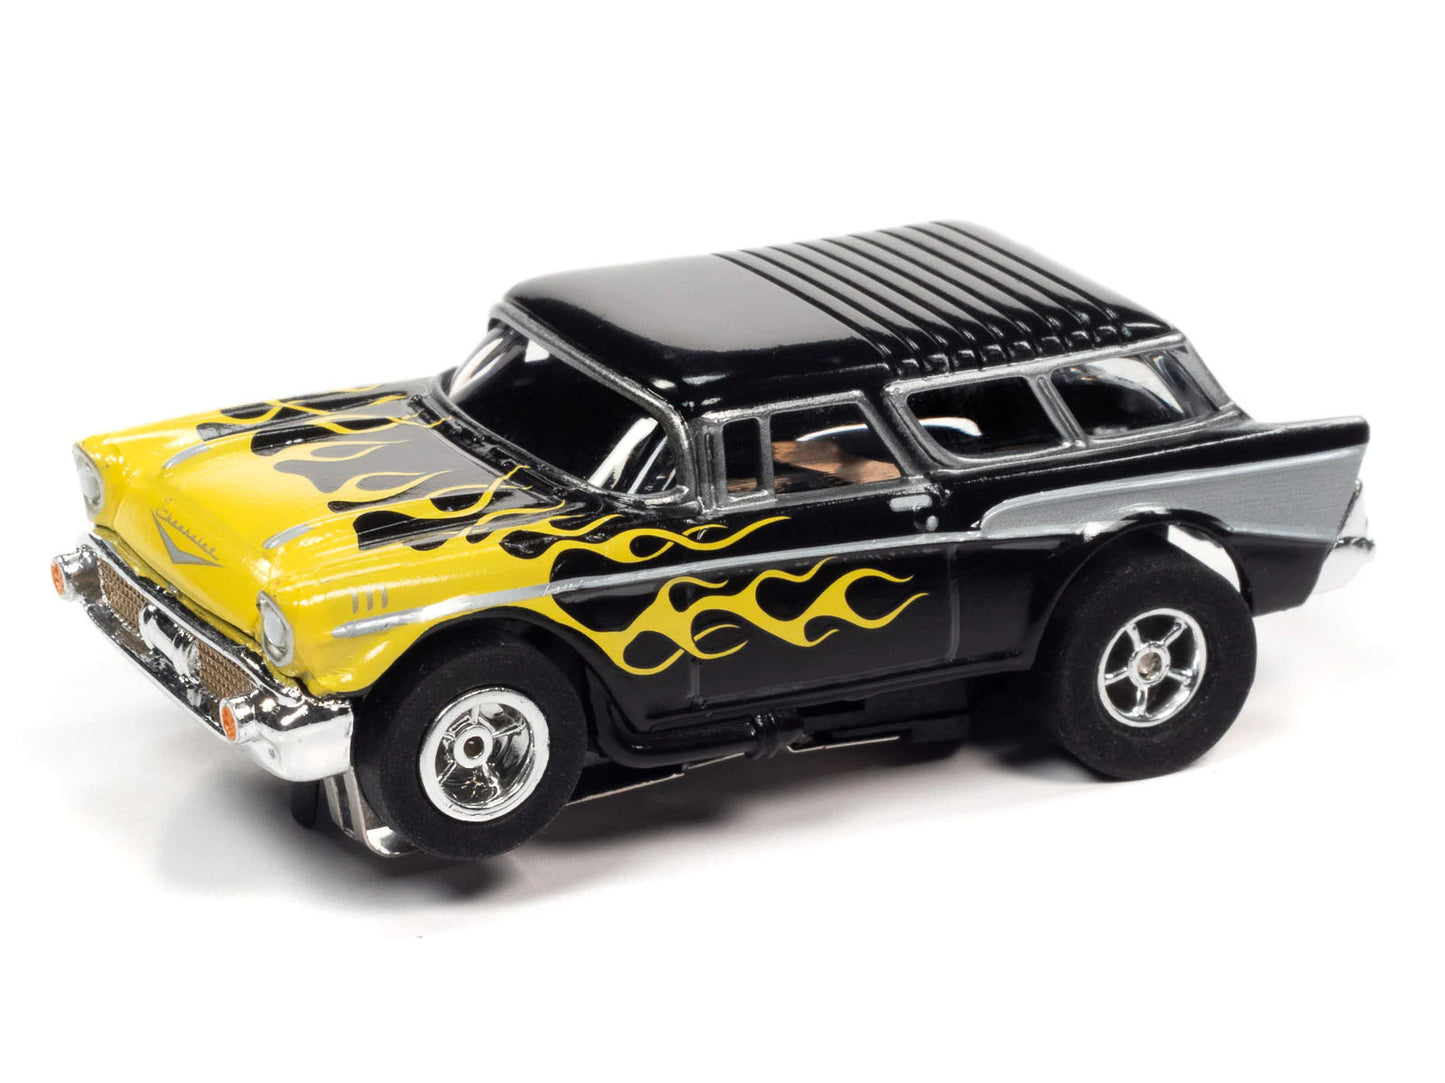 Auto World 1957 Chevrolet Nomad Exclusive Limited Edition HO Slot Car Protinker - PowerHobby